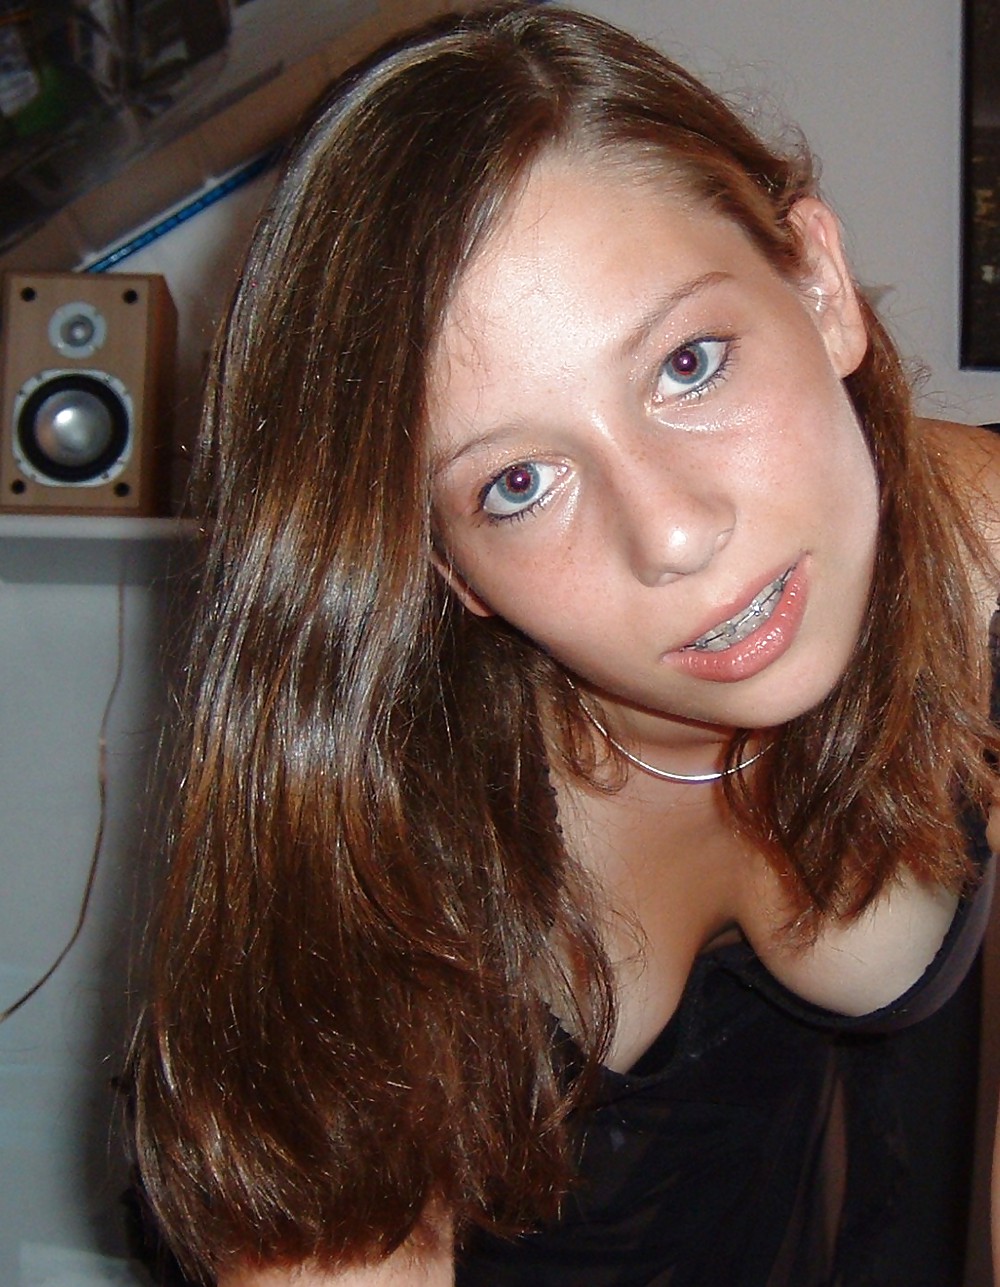 Free Perfect cute amateur teen in braces to jerk off to photos